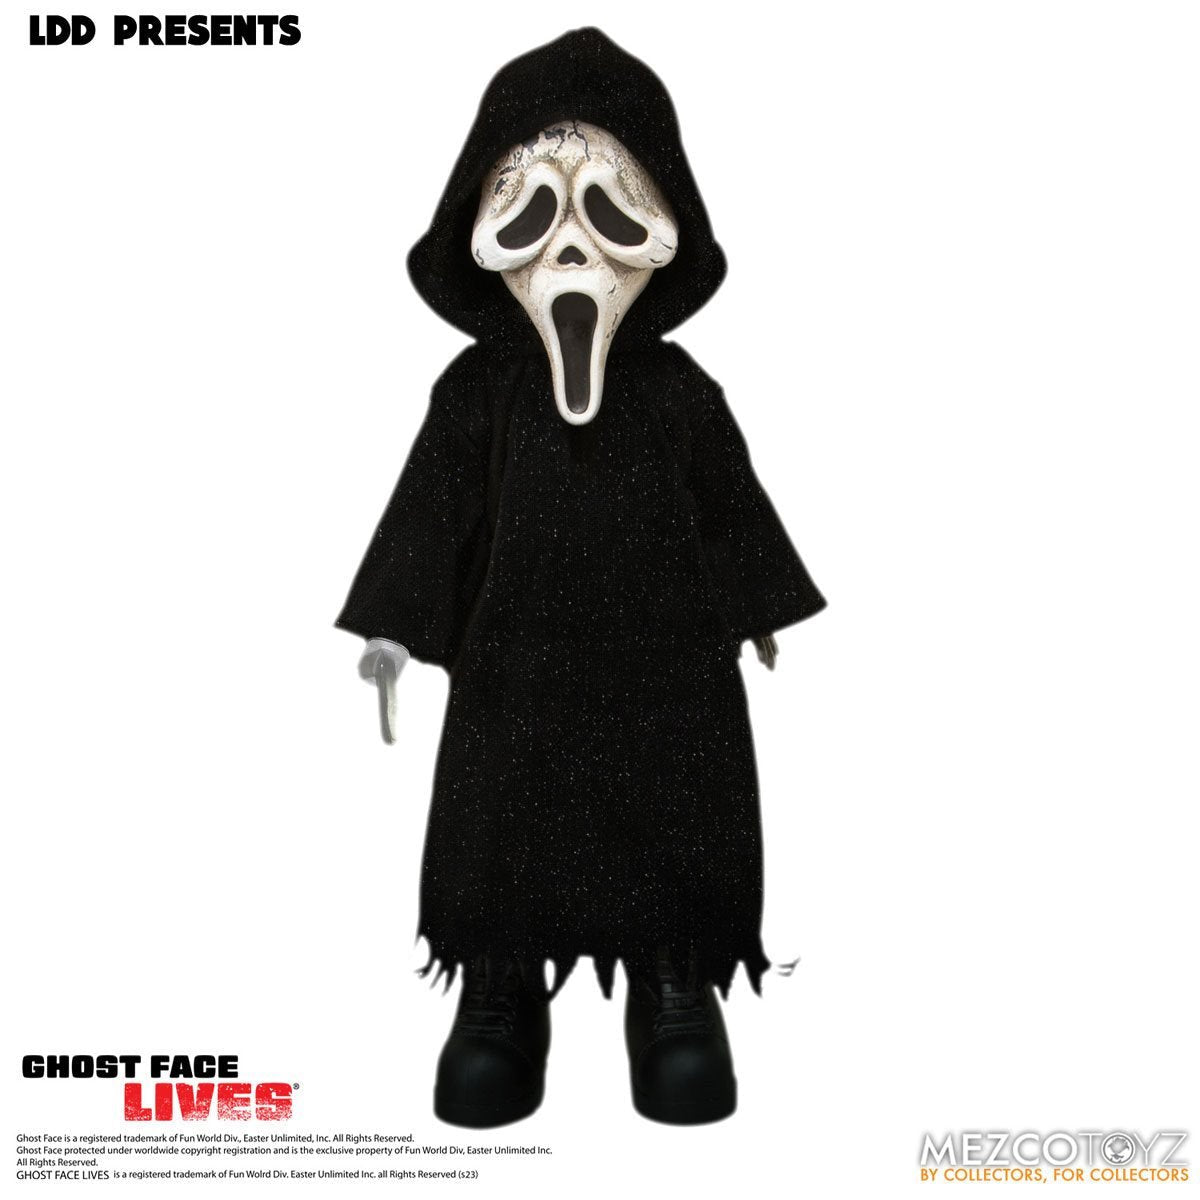 LDD Presents Ghost Face Zombie Edition 10-Inch Doll - Simon's Collectibles